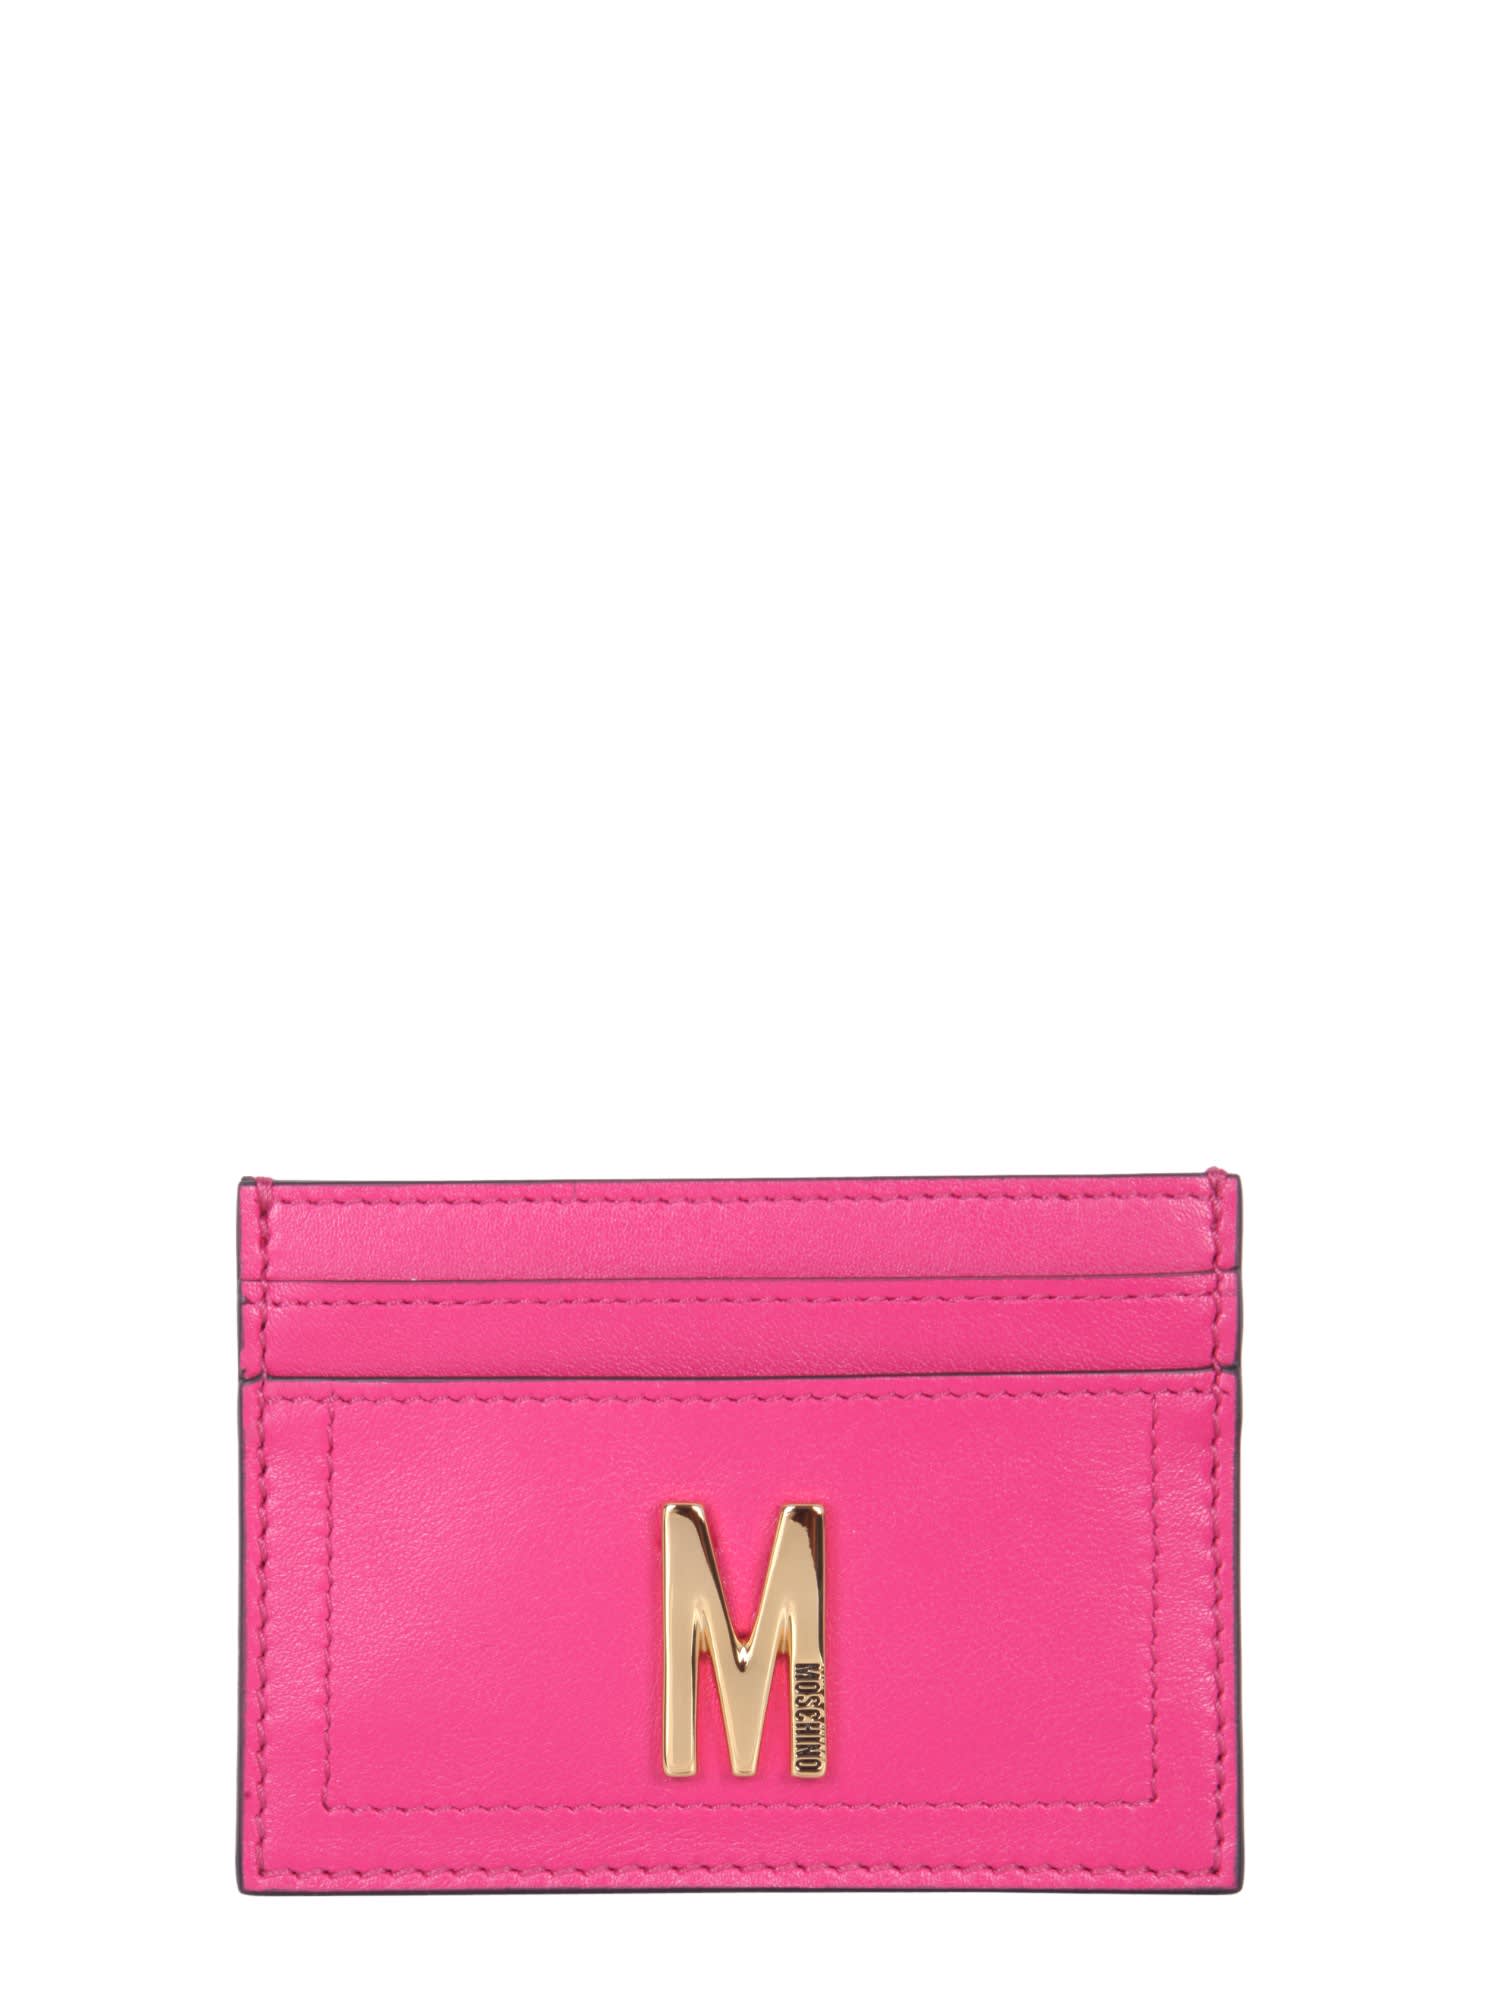 Moschino Leather Card Holder